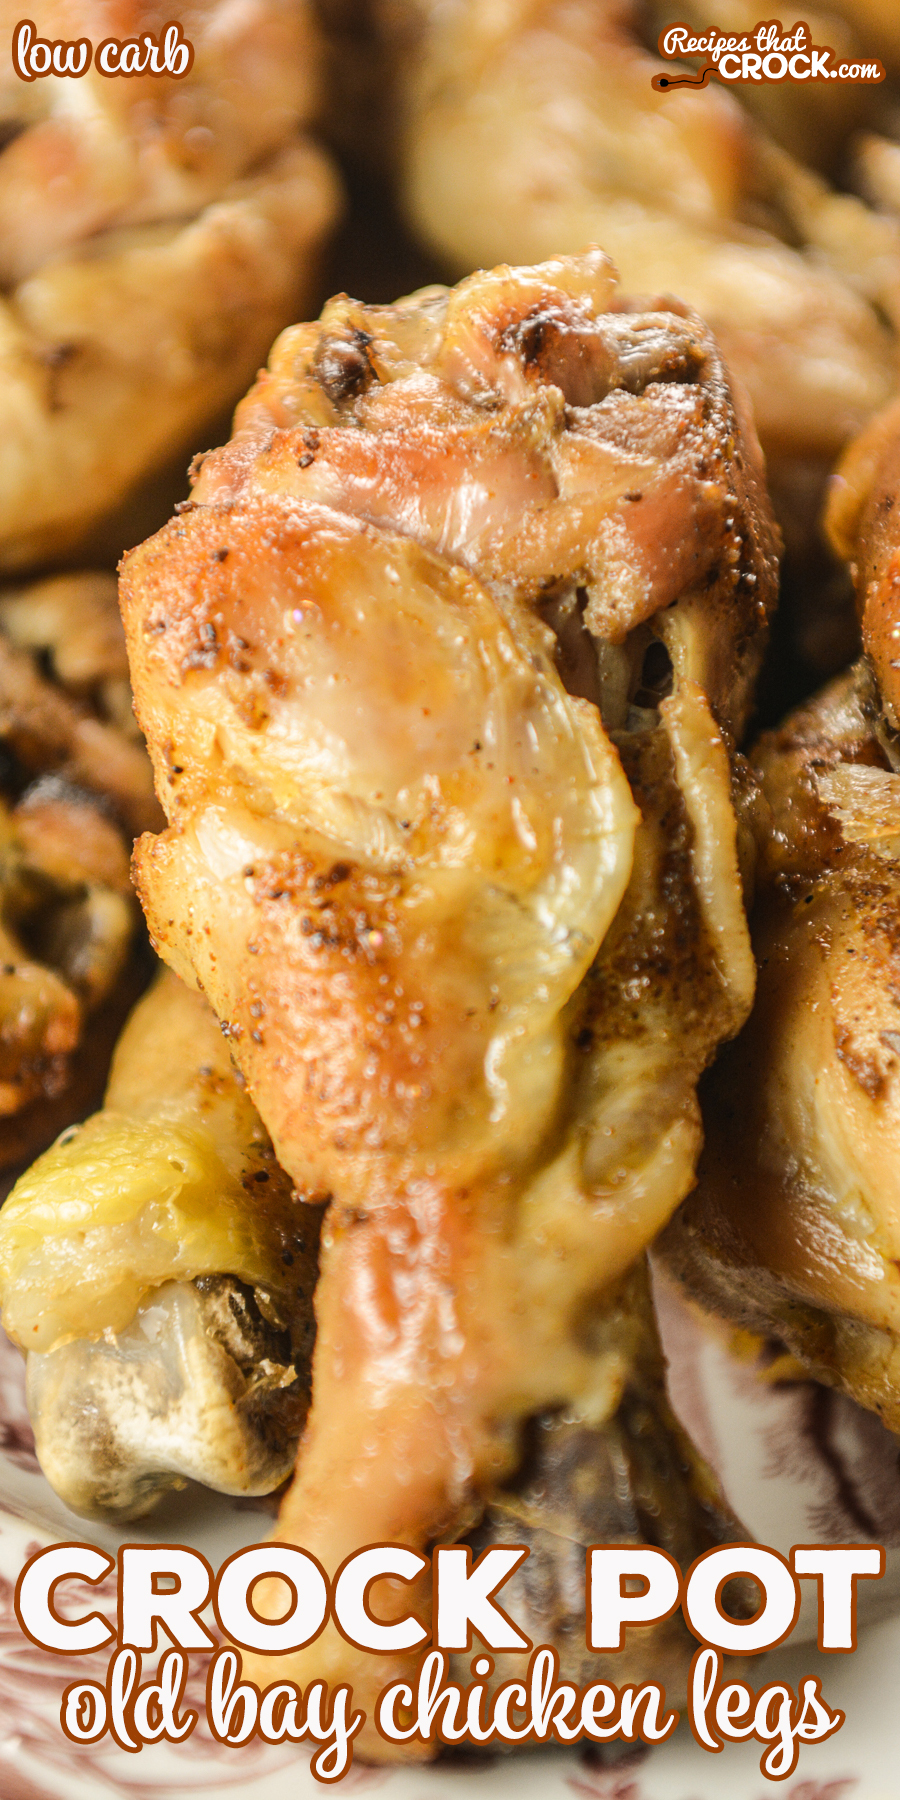 These Crock Pot Old Bay Chicken Legs are flavorful, low carb and incredibly simple to make! Everyone will be asking you for this recipe and won't believe you when you tell them how easy it is! via @recipescrock